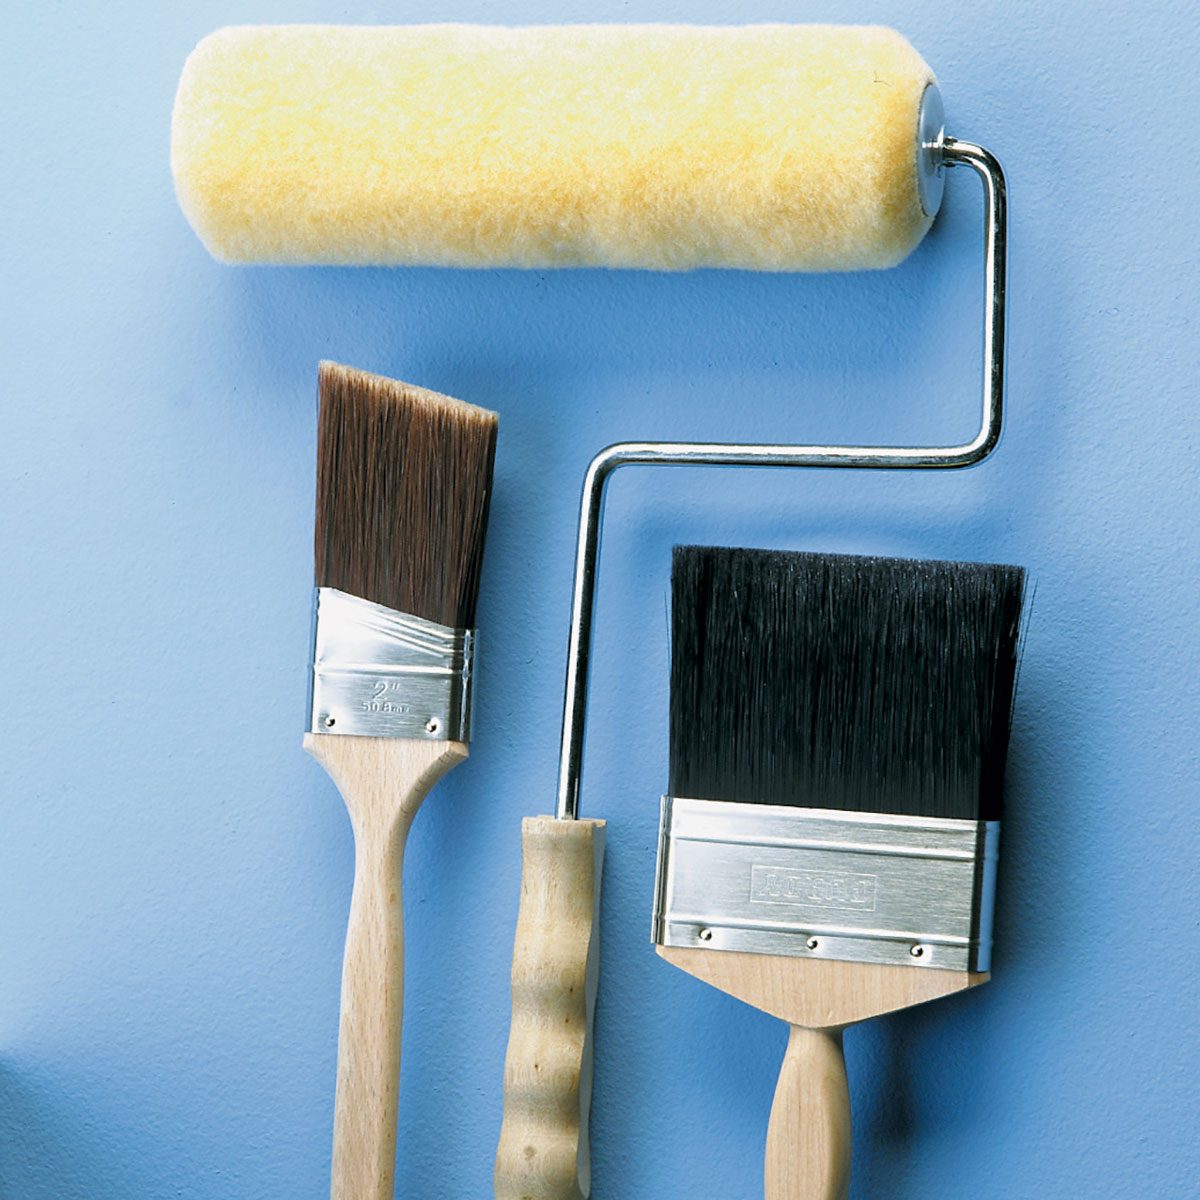 Three types of paint application tools | Construction Pro Tips